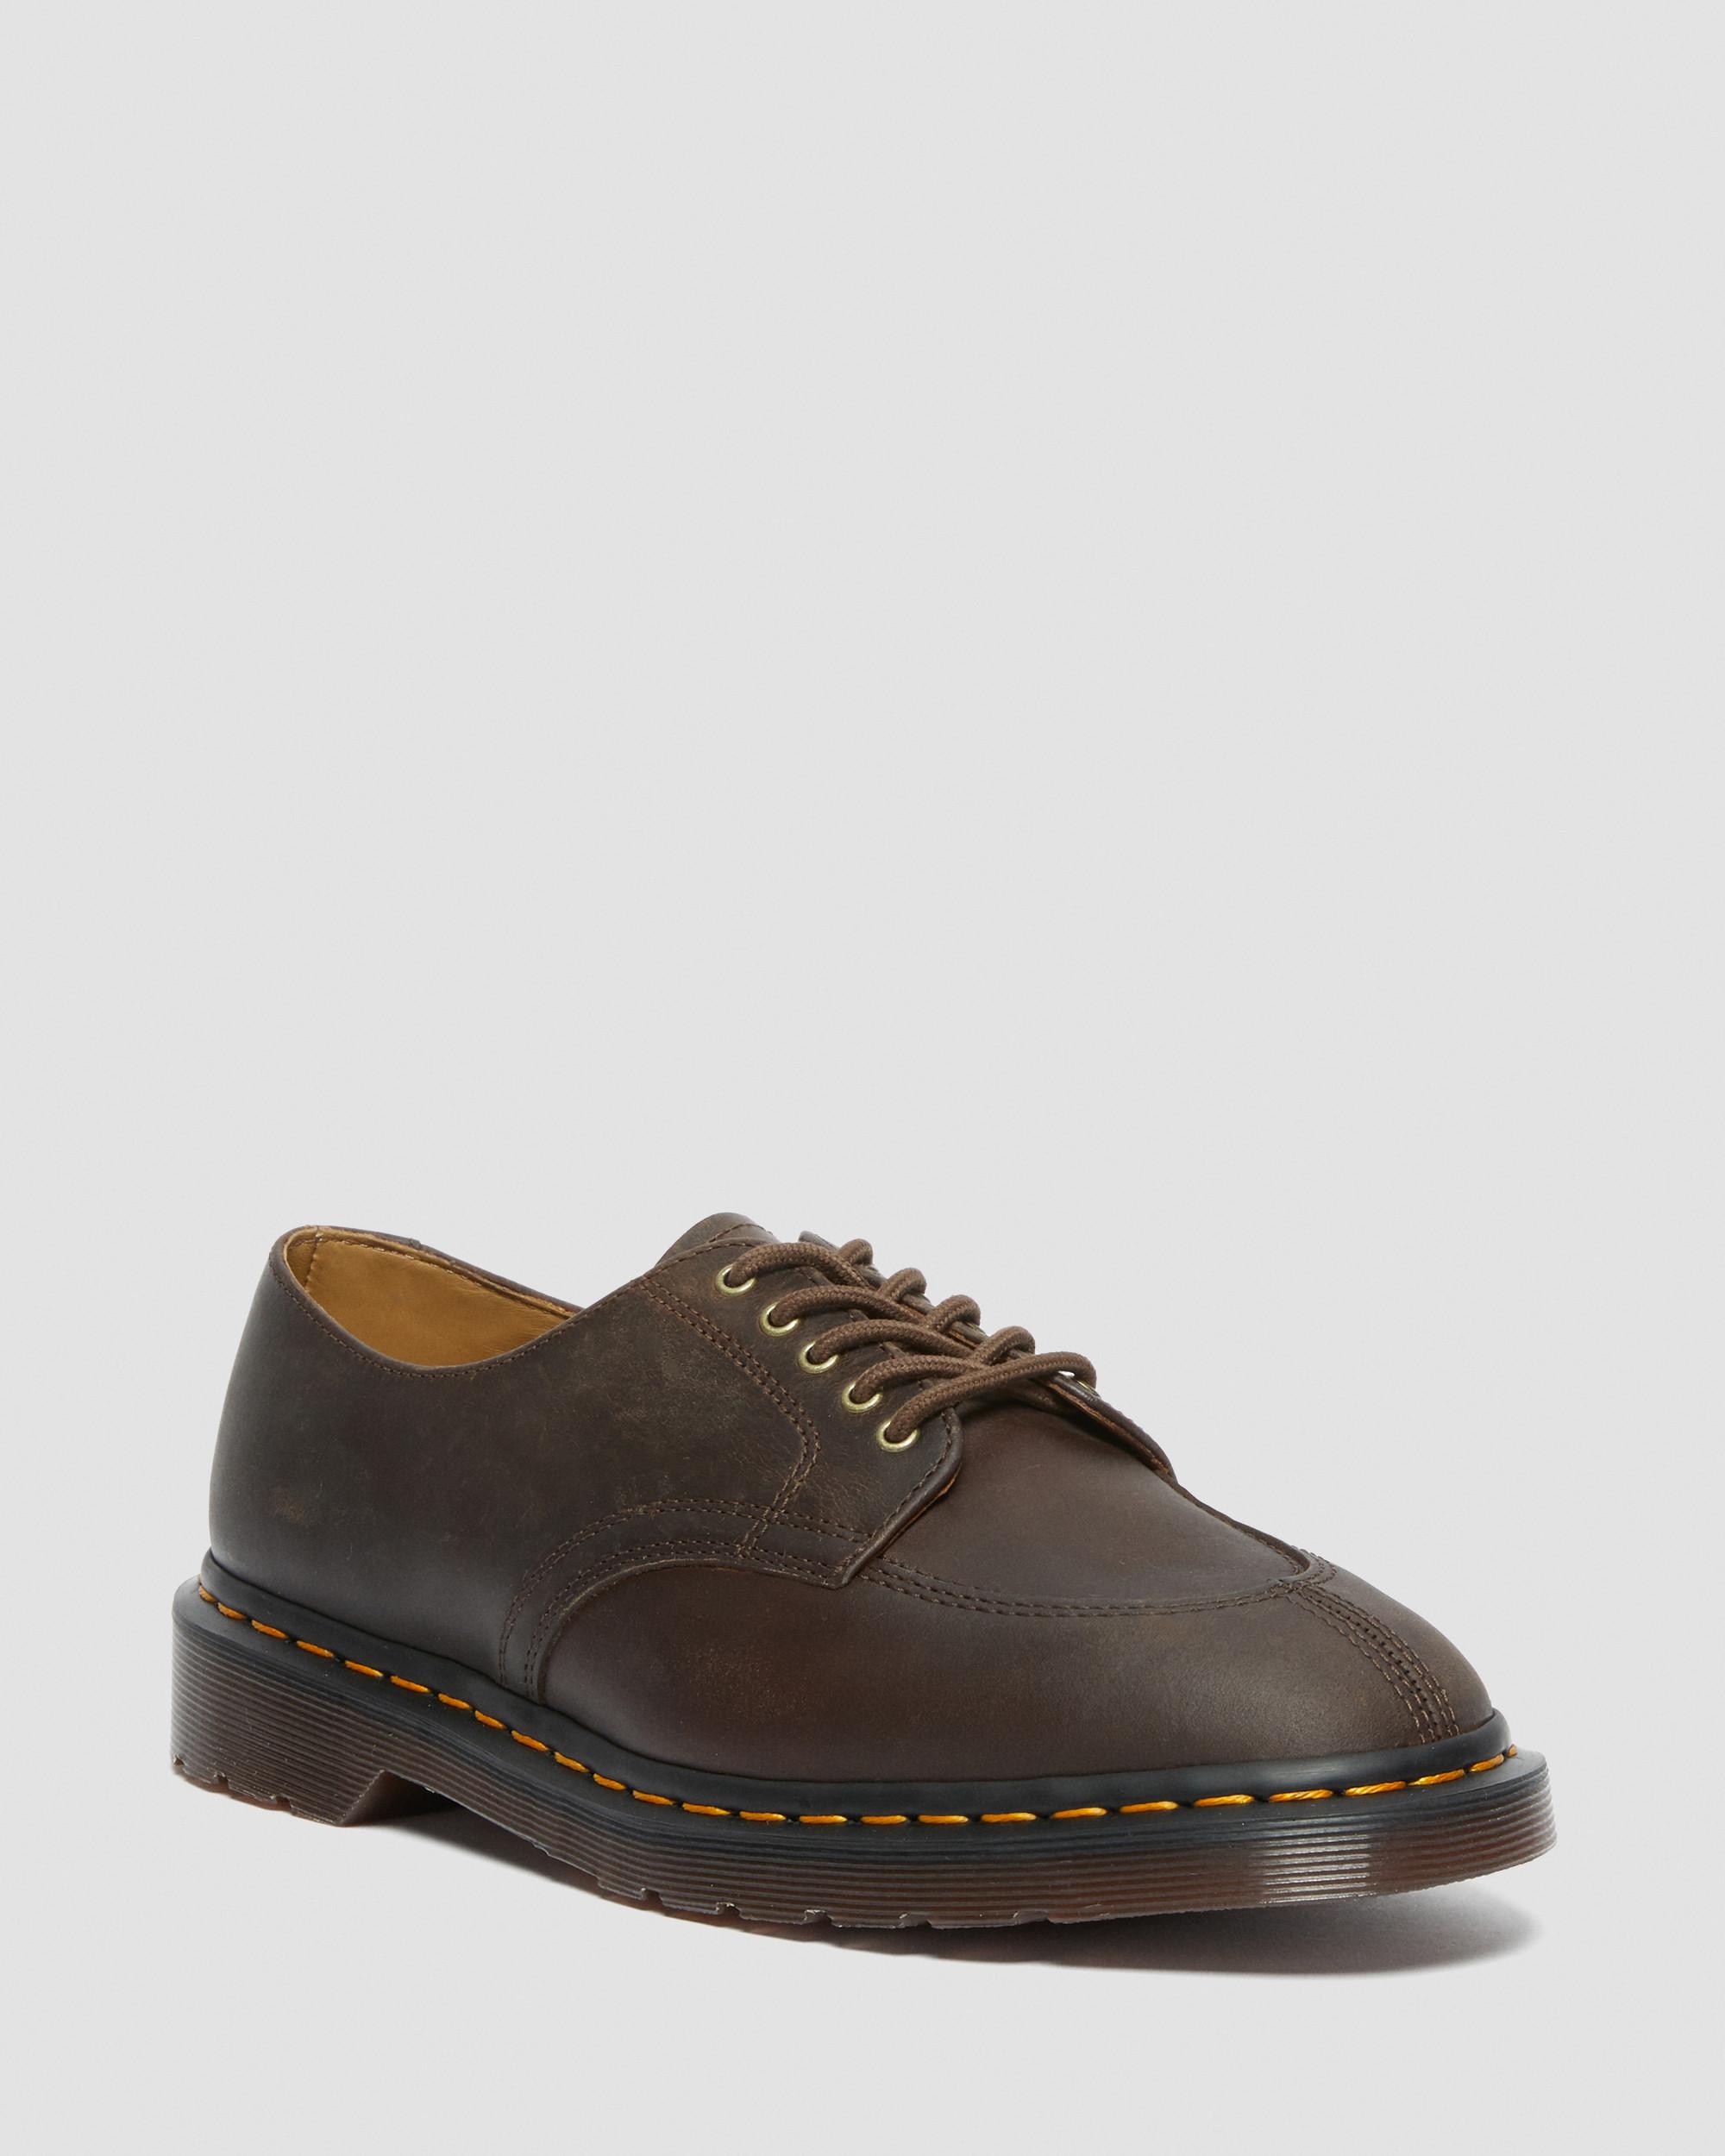 2046 Crazy Horse Leather Shoes, Dark Brown | Dr. Martens